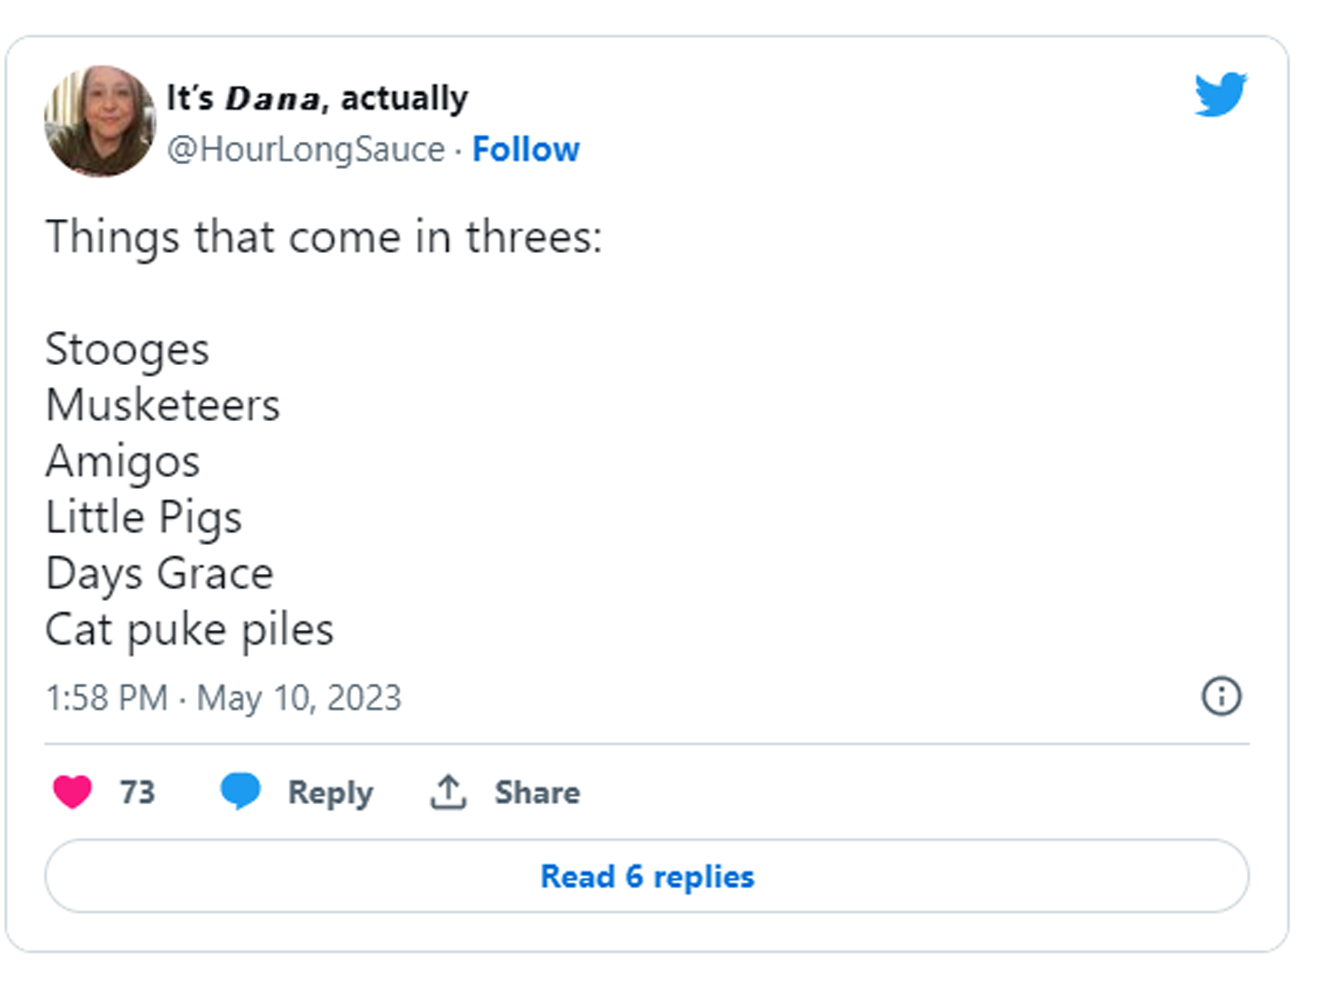 elon musk openai twitter - It's Dana, actually . Things that come in threes Stooges Musketeers Amigos Little Pigs Days Grace Cat puke piles 73 Read 6 replies